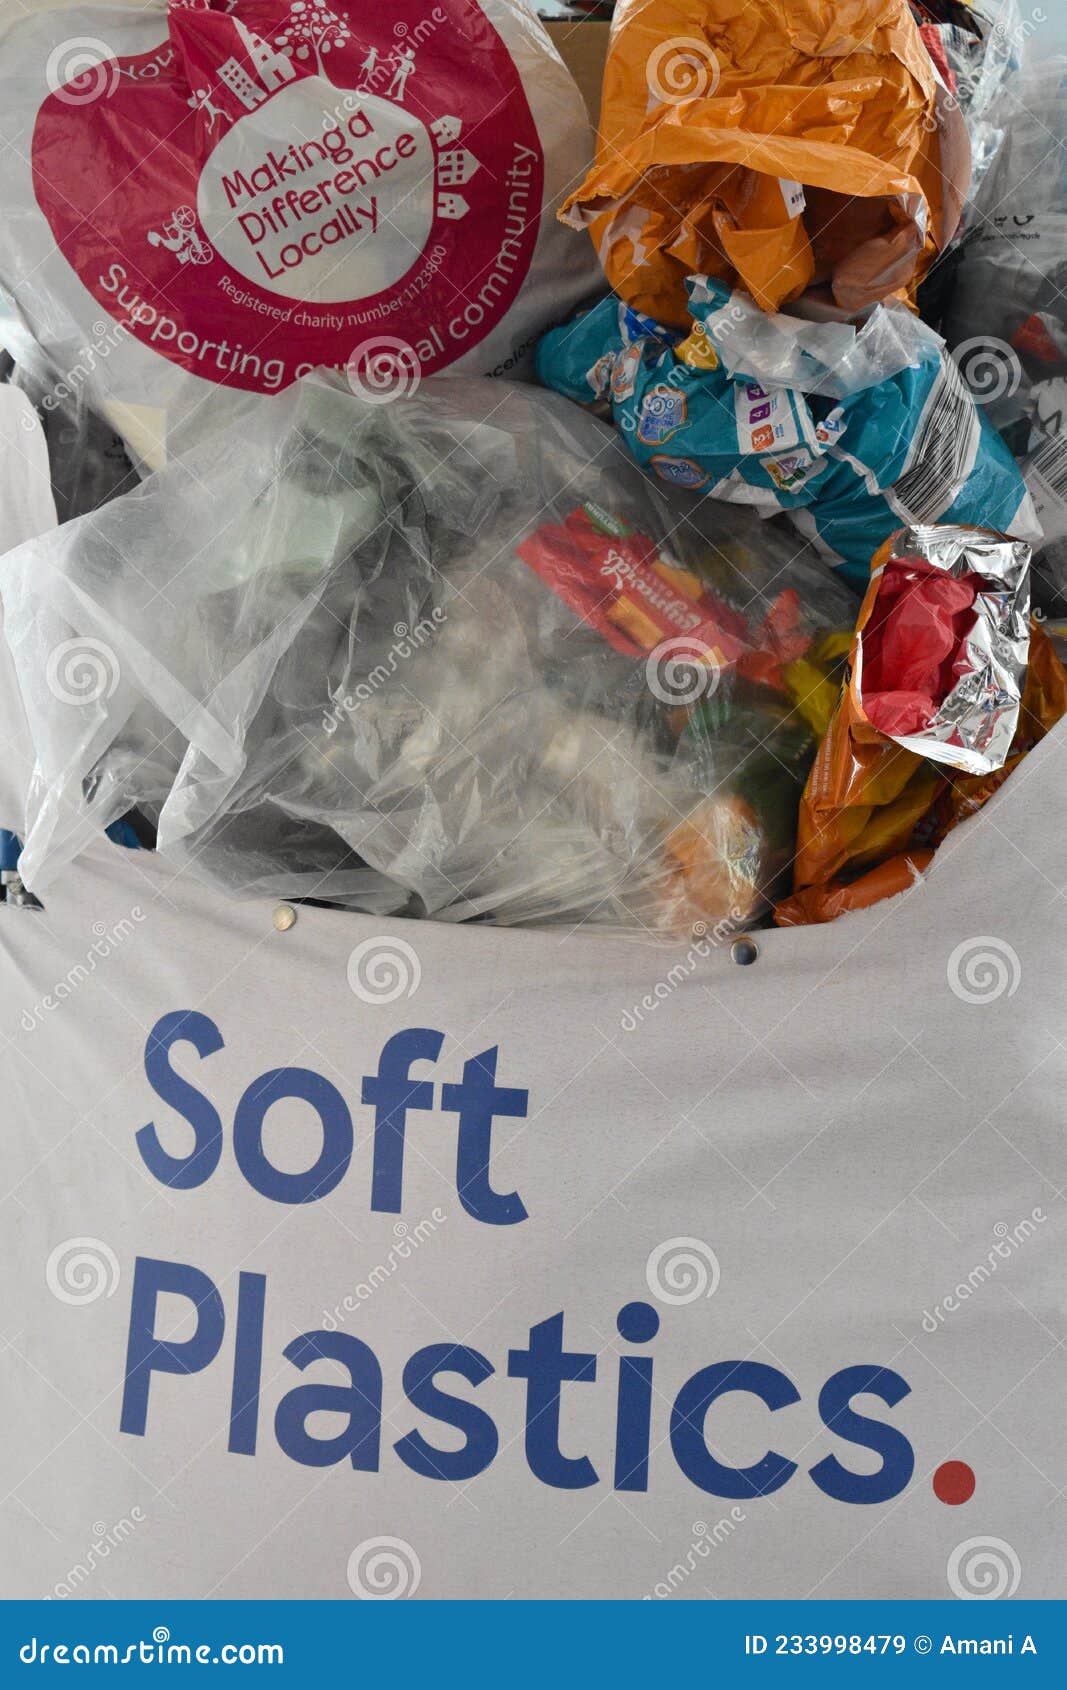 A Soft Plastics Recycling Point Piled High and Overflowing with